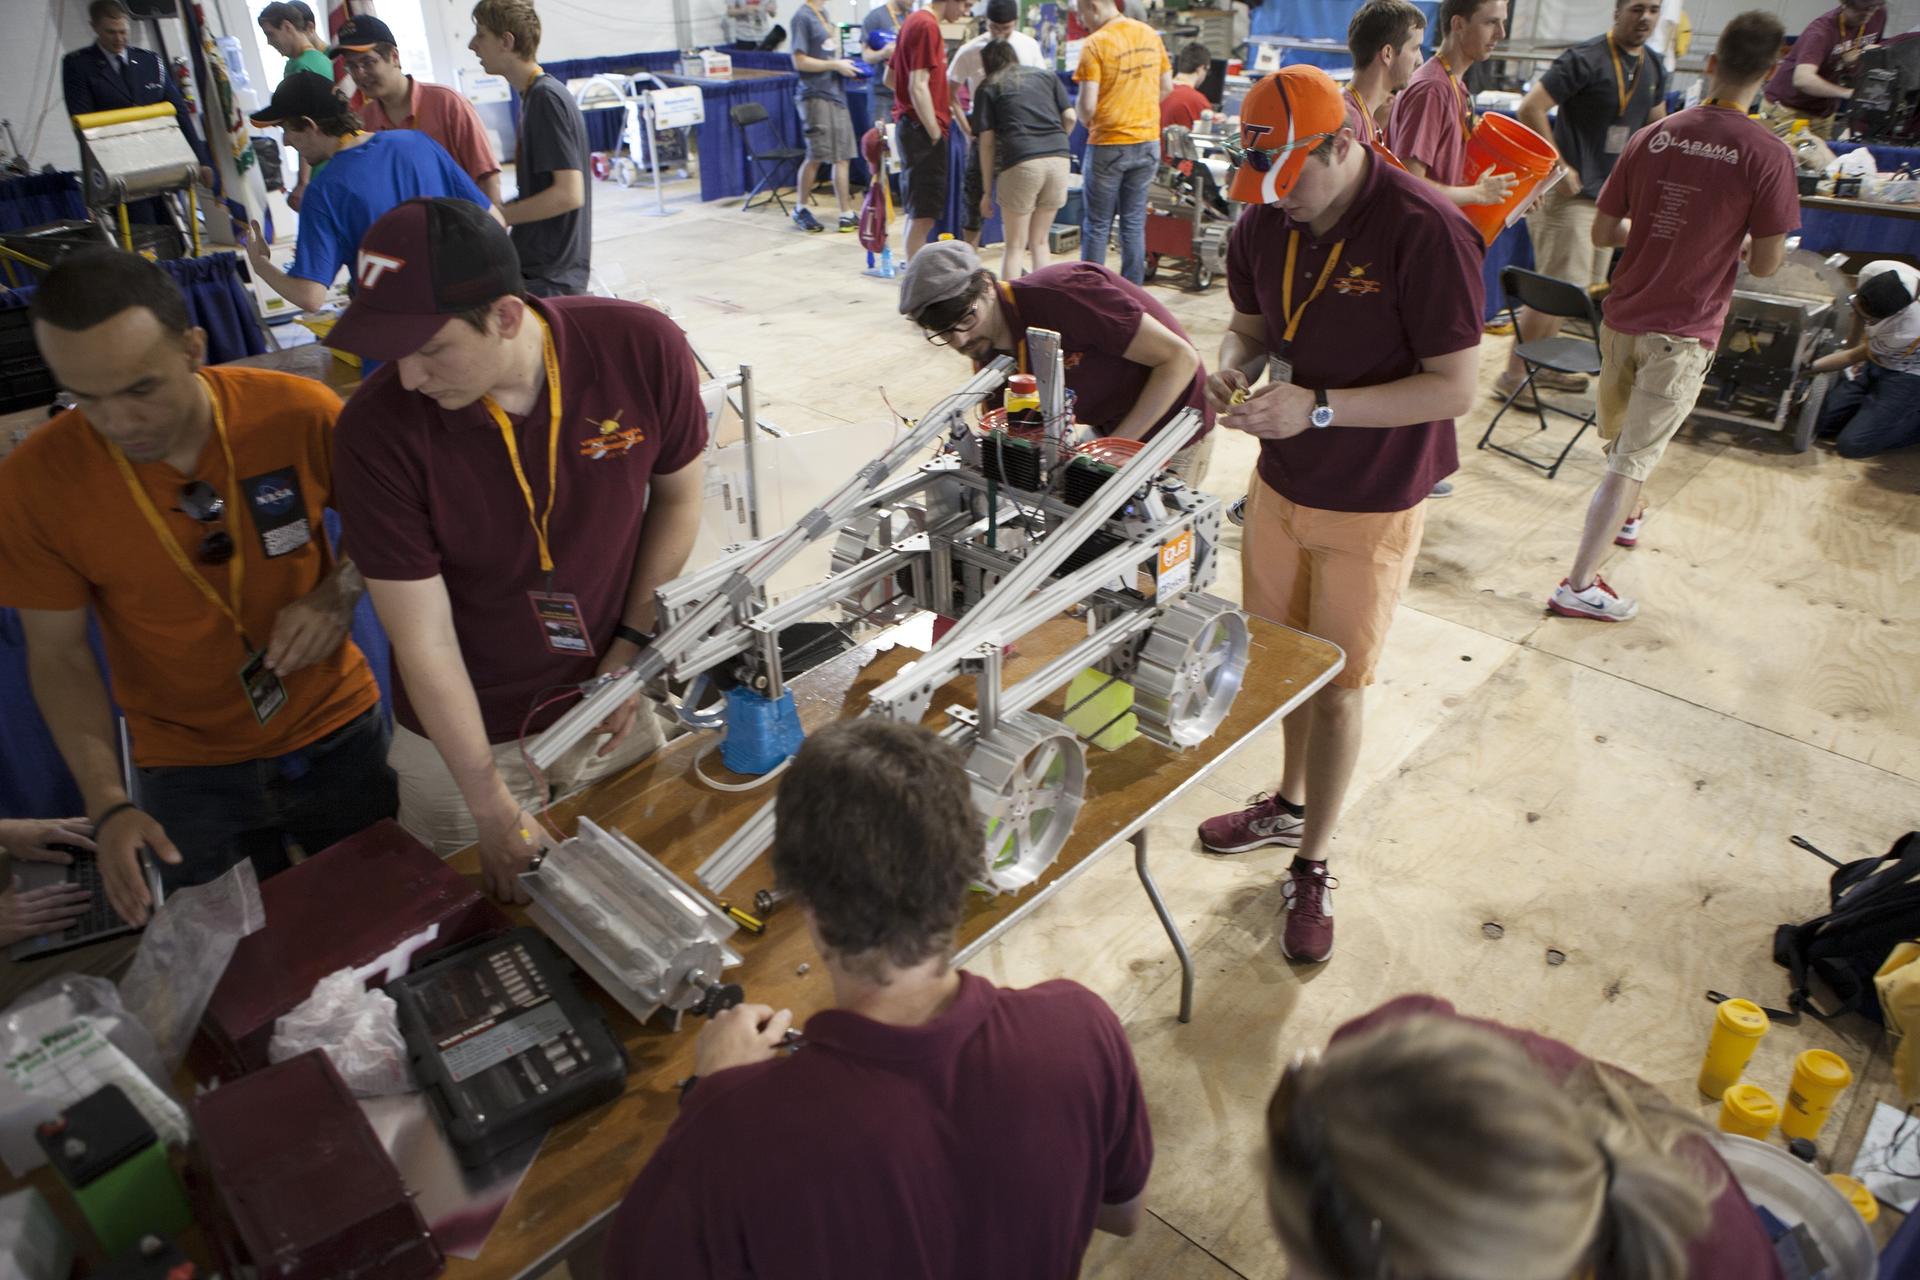 Team members from the University of Alabama prepare their robot during NASA's 2014 Robotics Mining Competition